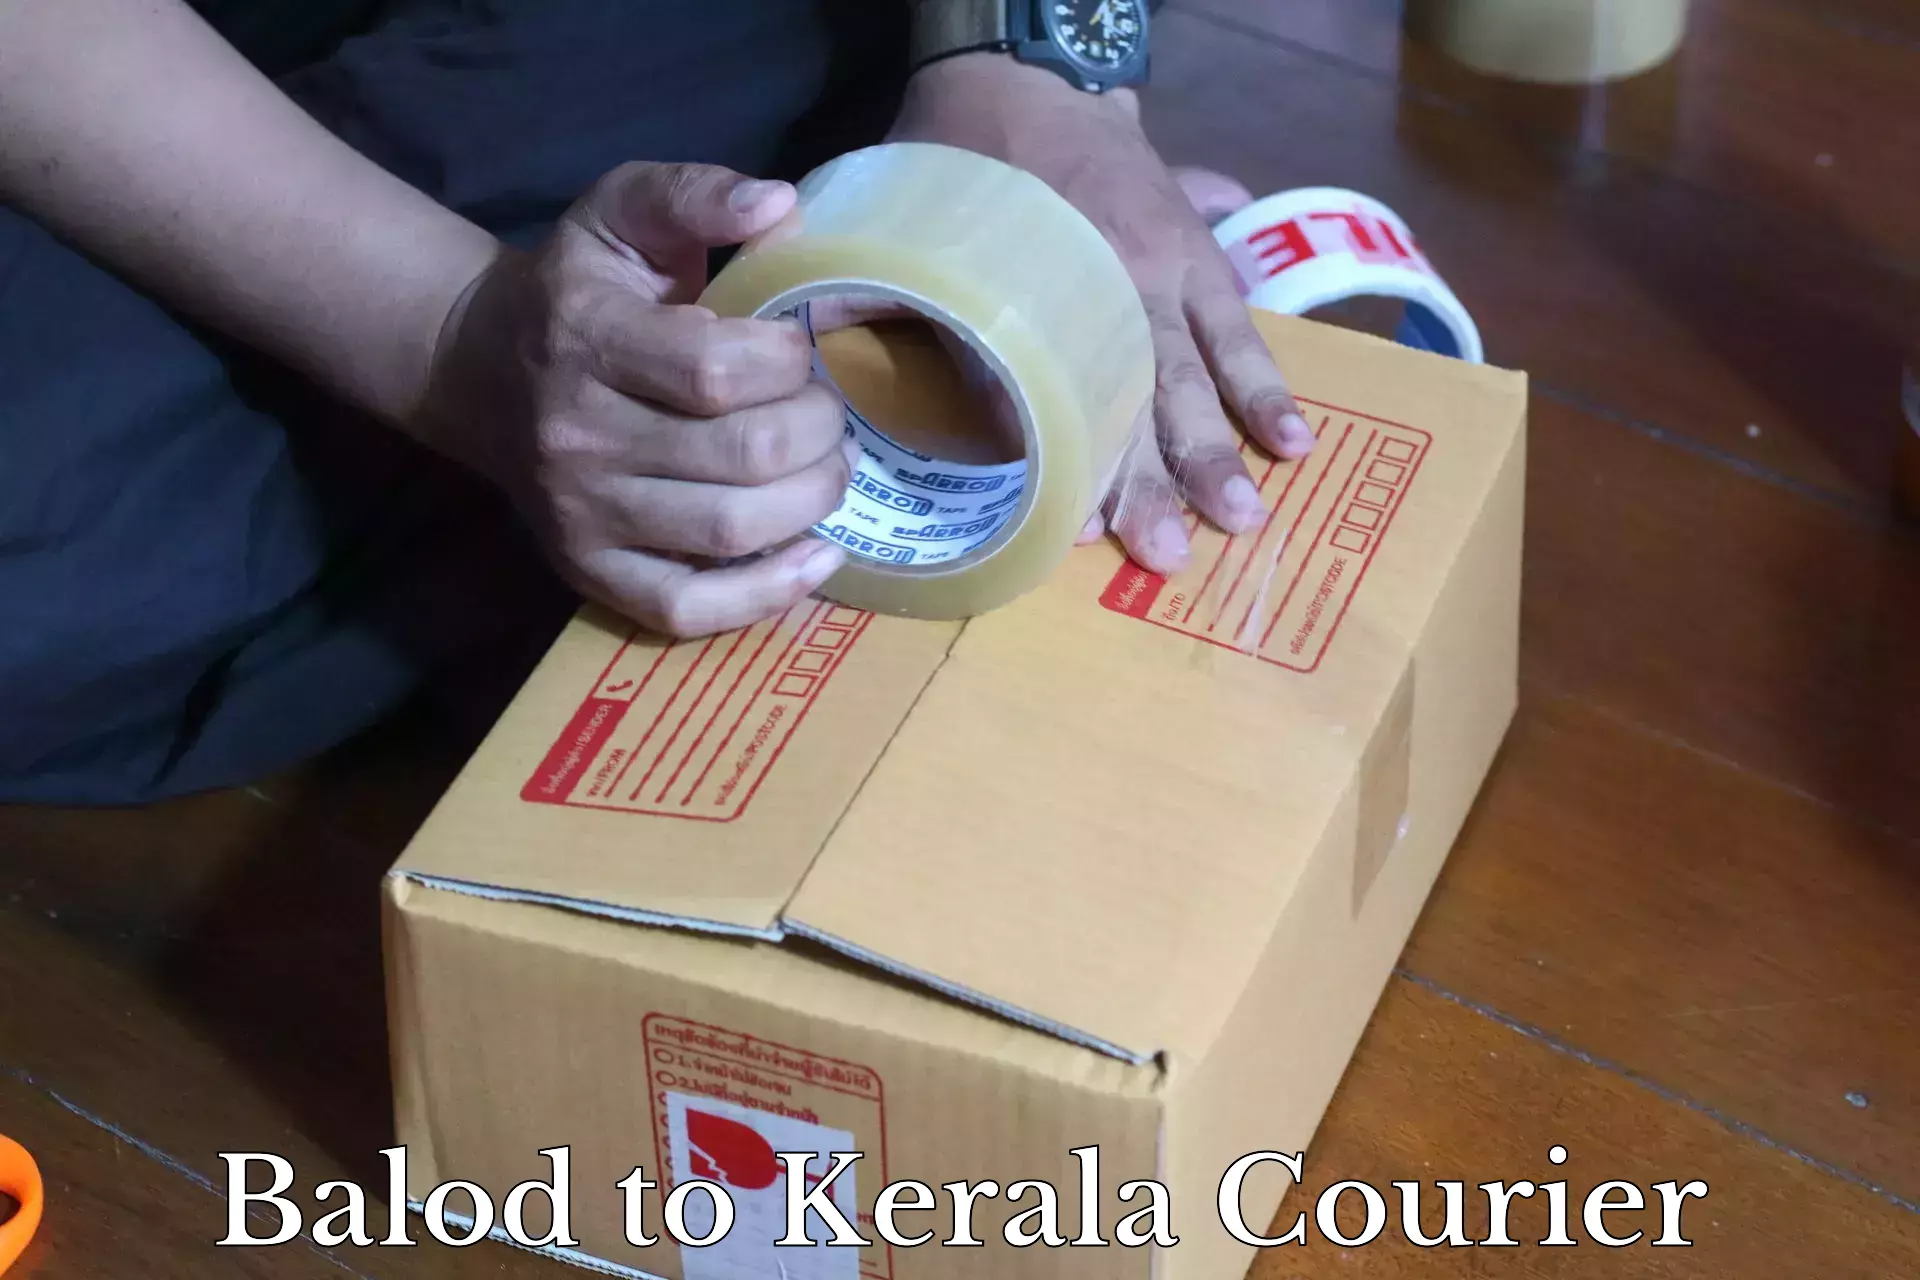 Professional courier handling Balod to Trivandrum